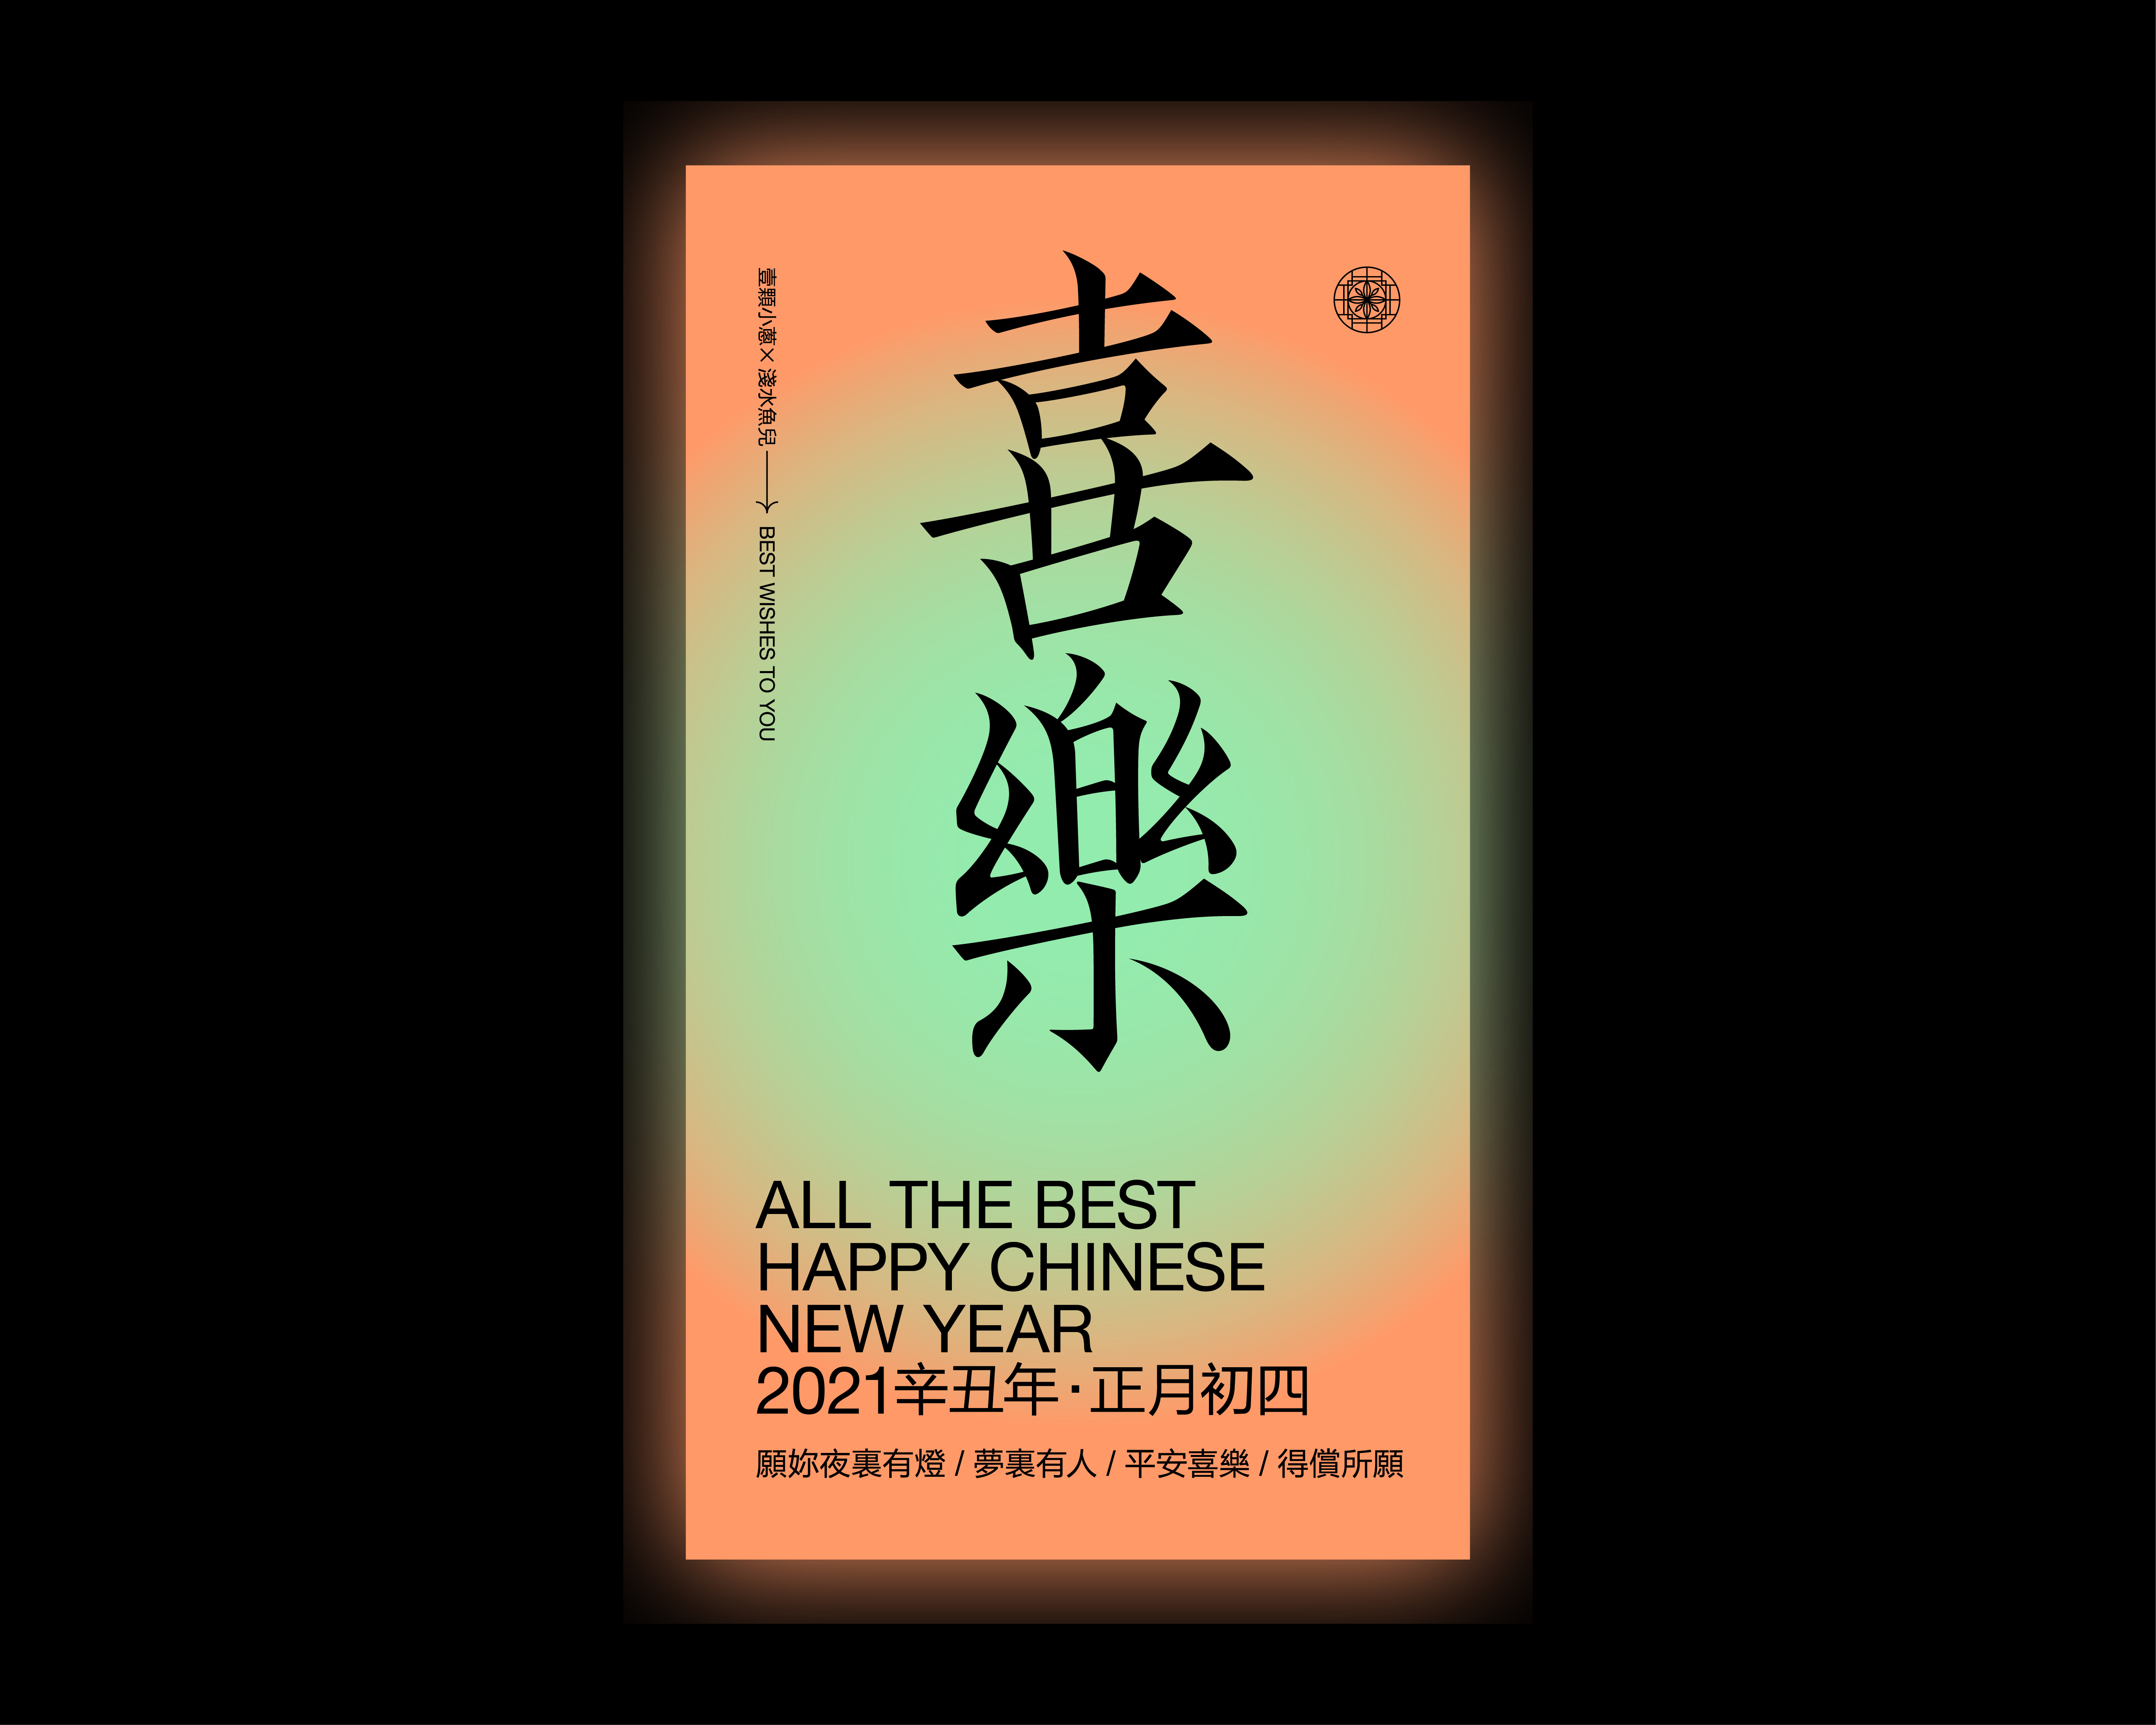 Old Chinese New Year greetings